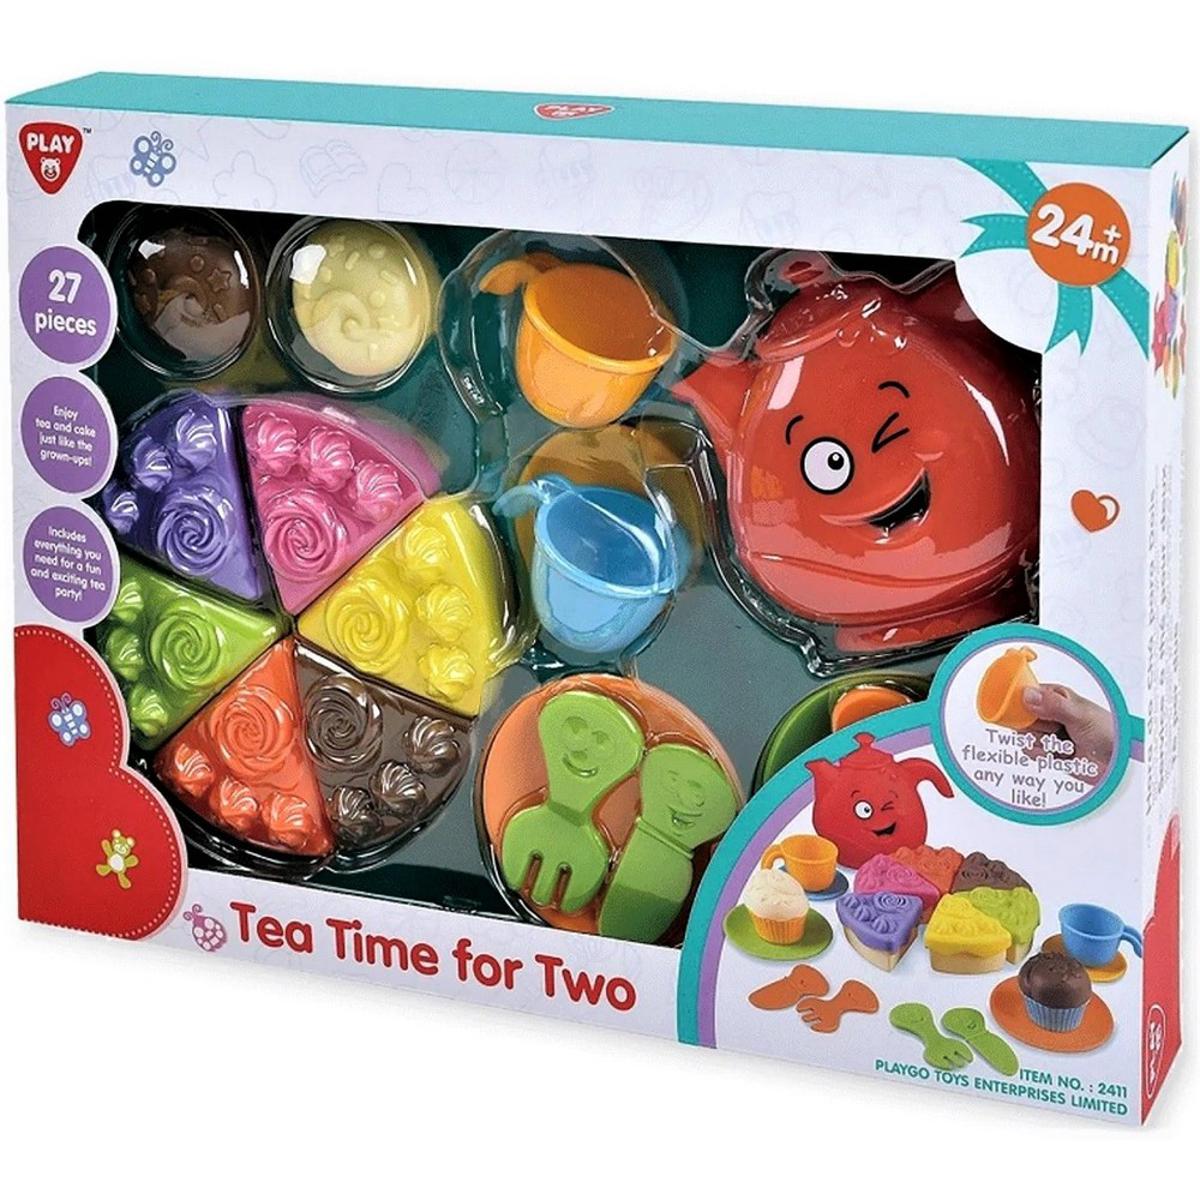 Playgo Tea Time For Two 27 Pcs